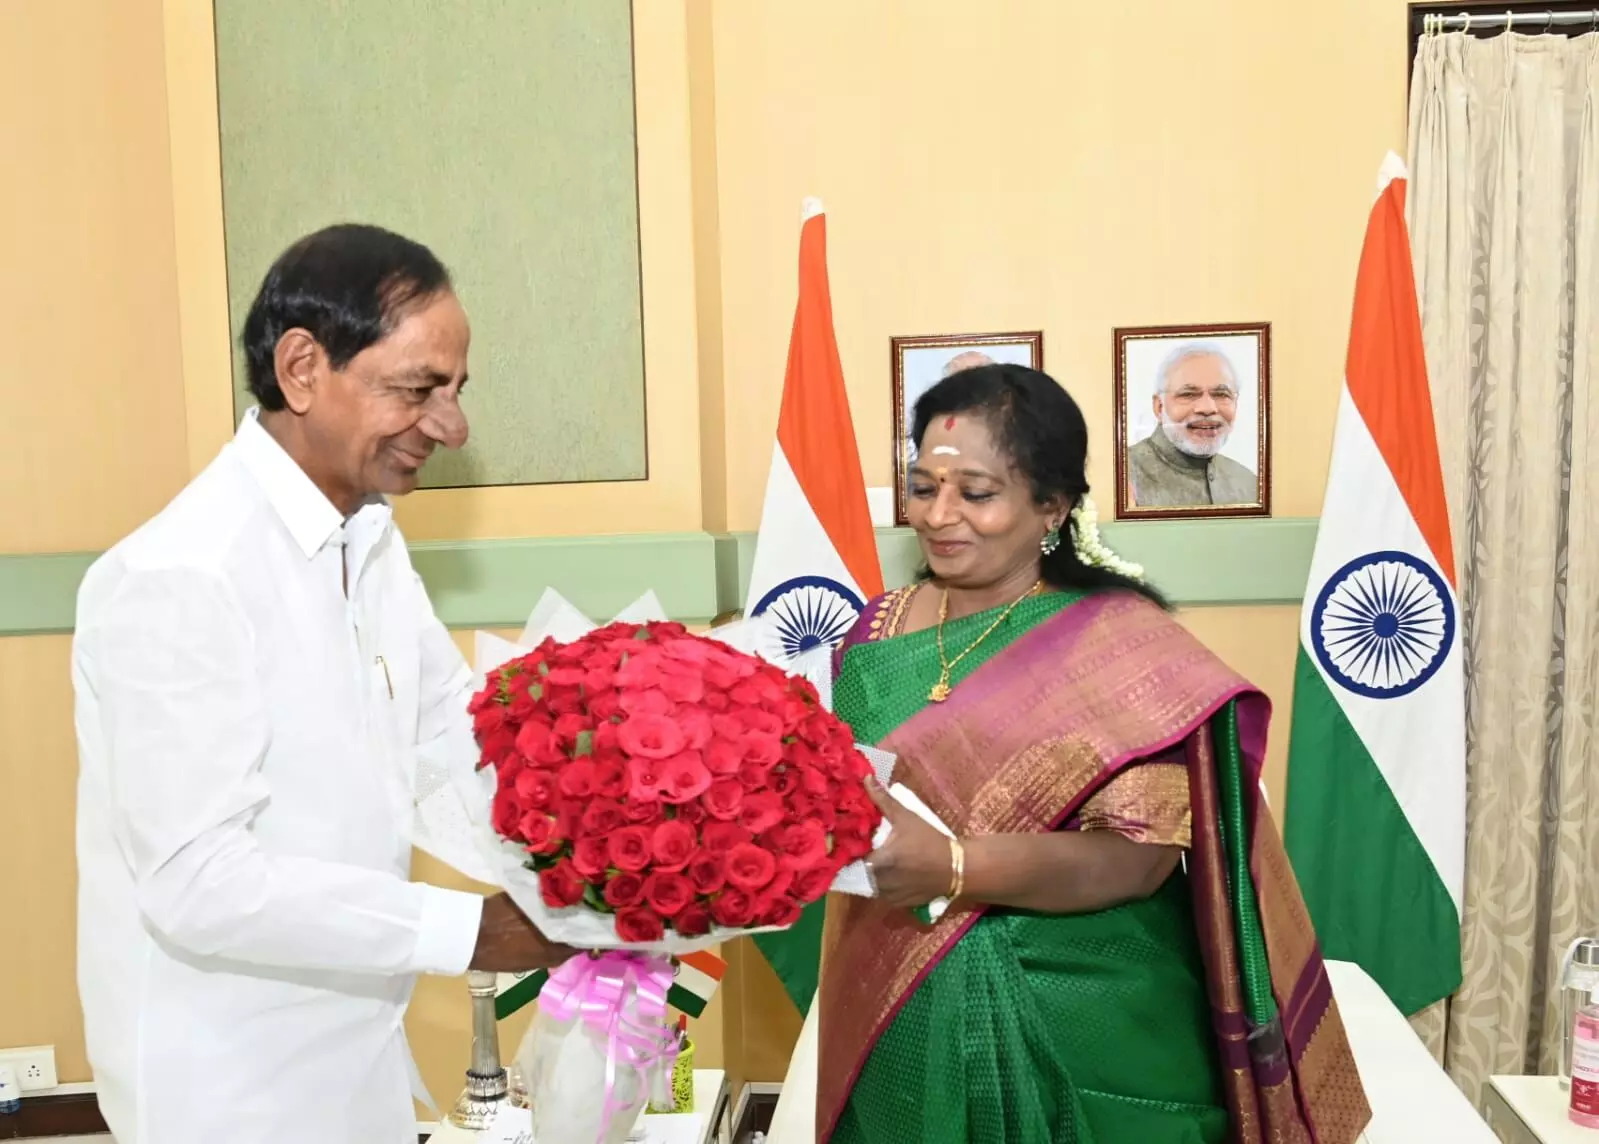 KCR meets Governor after 9 months